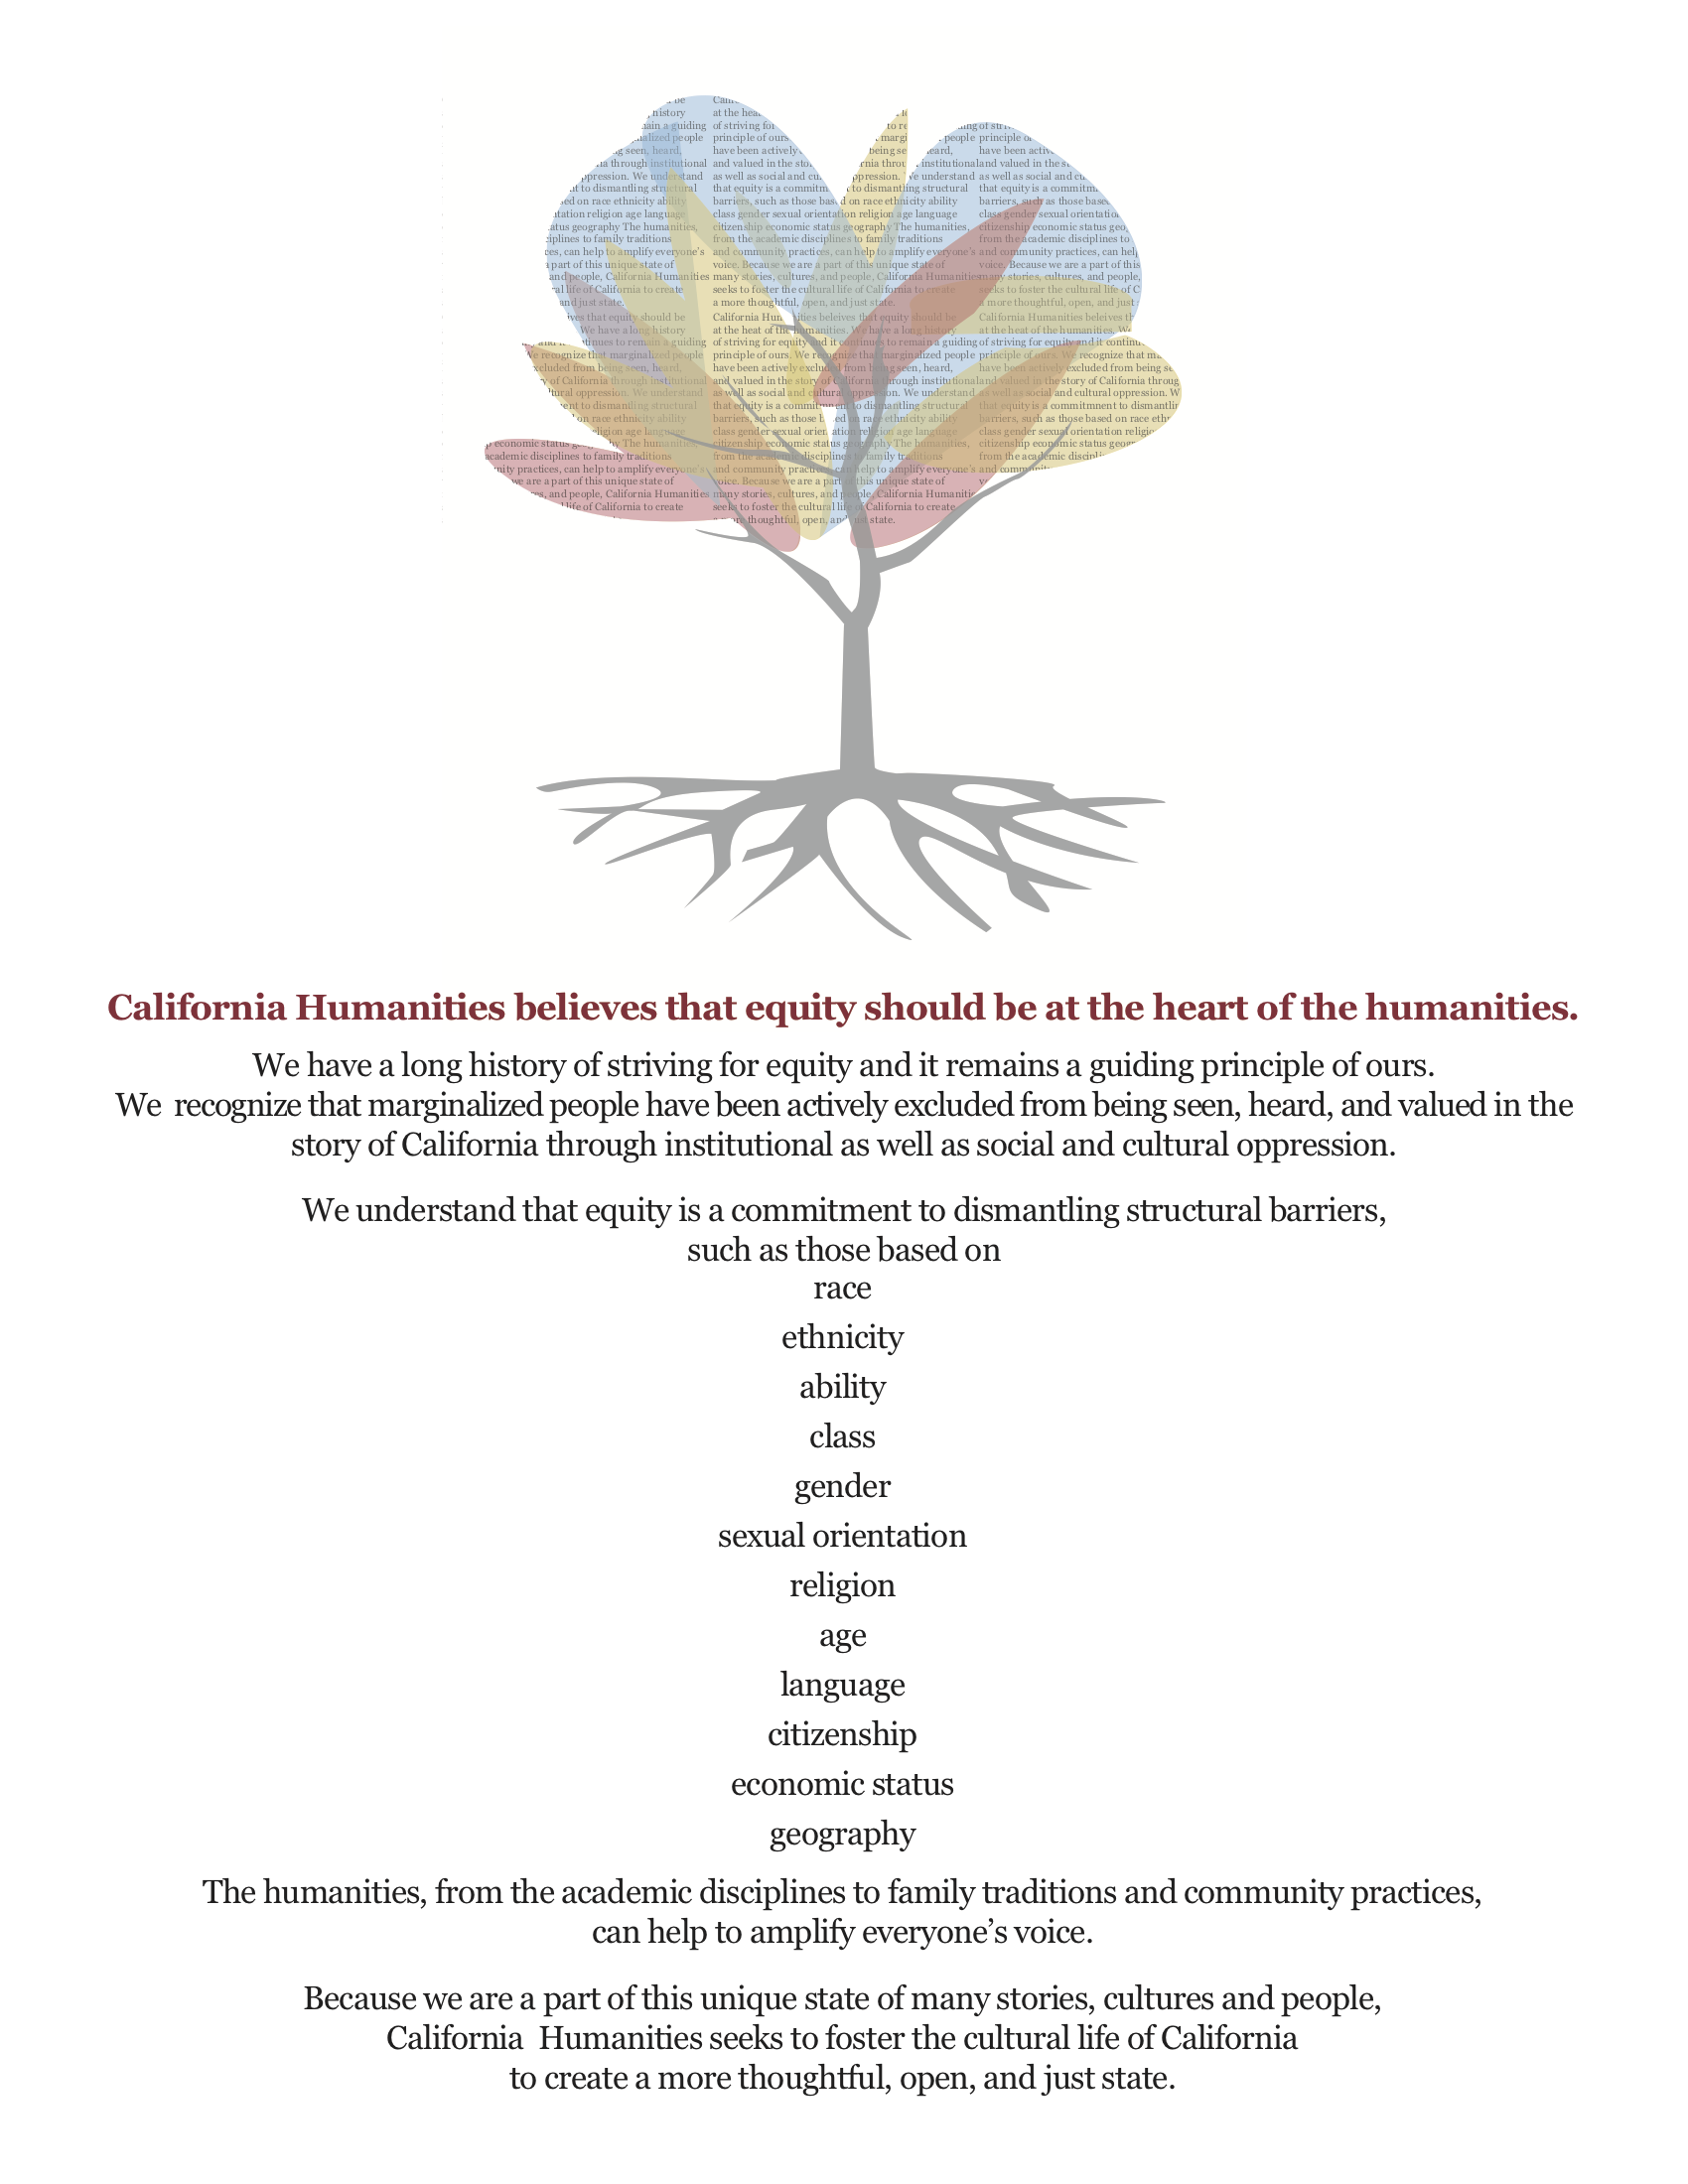 A tree with colorful leaves filled with words and the equity statement below it. Includes a link to pdf version of statement.